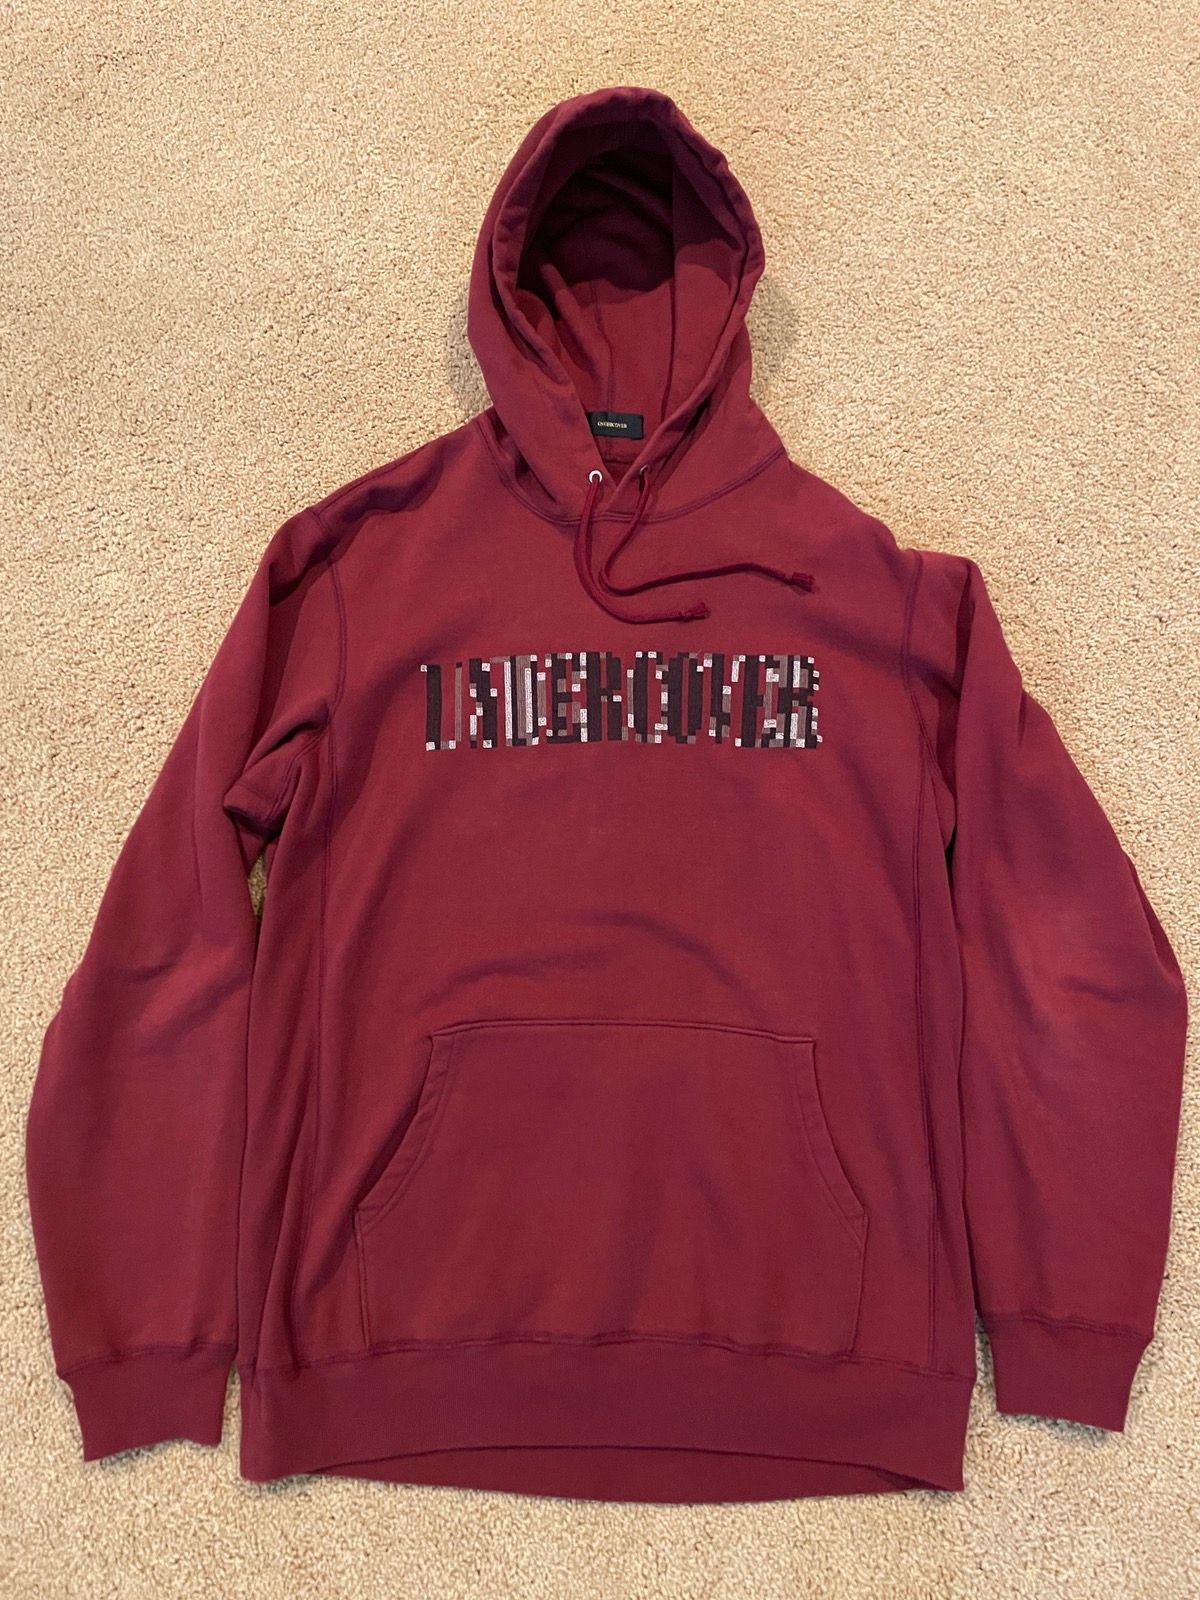 Undercover Undercover Witch Hoodie | Grailed